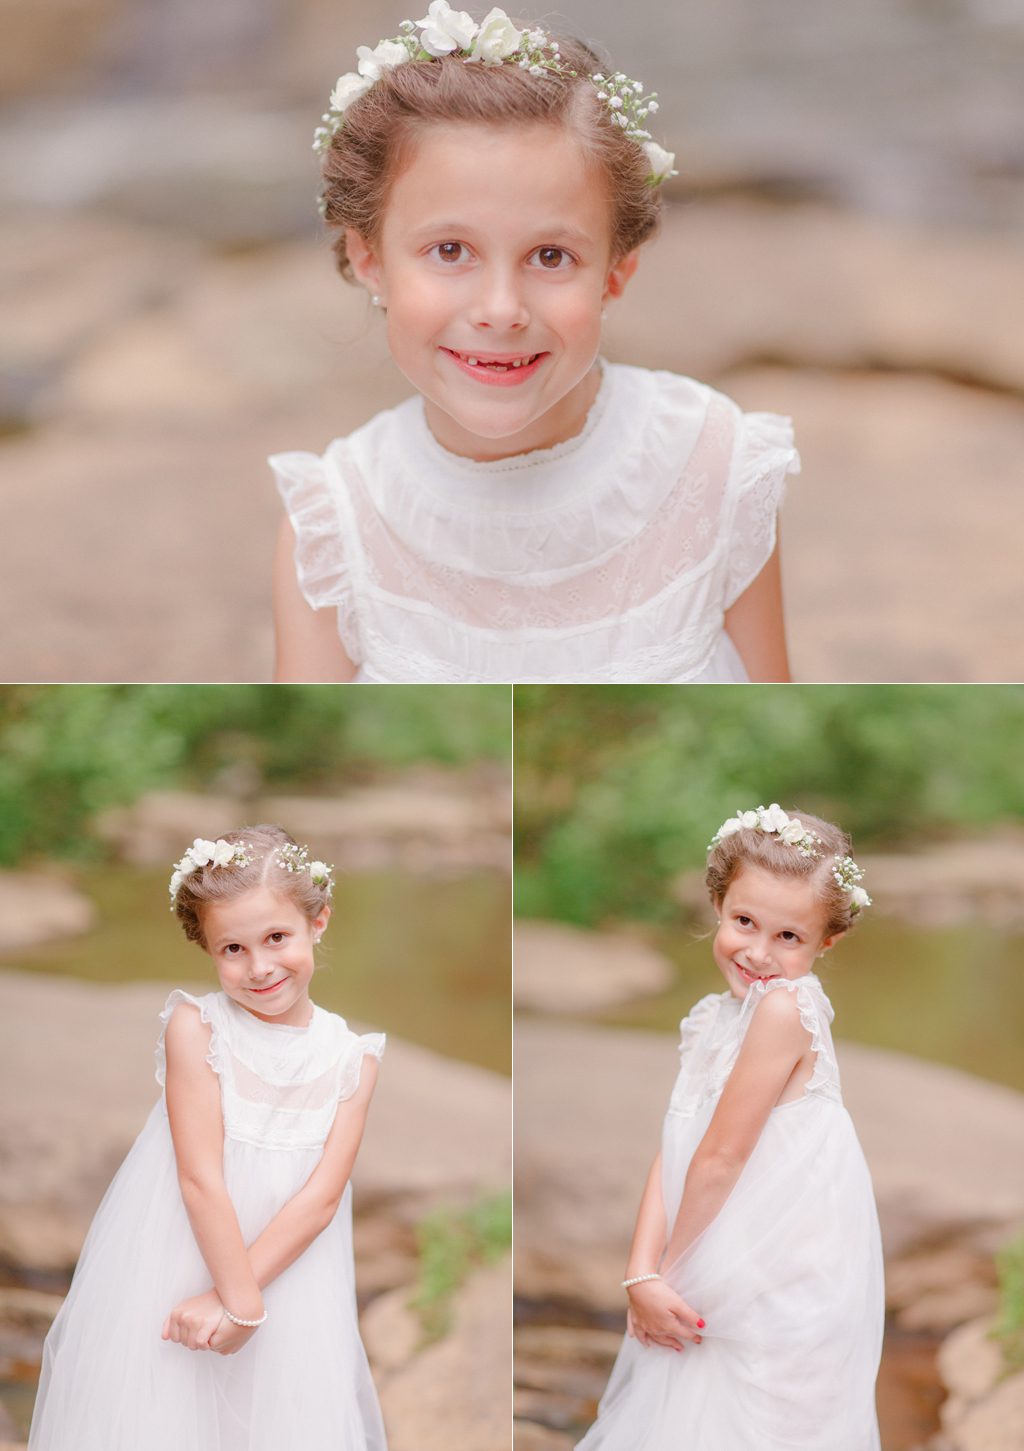 Pictures of an eight year old girl on the shoals of Oconee County, GA.